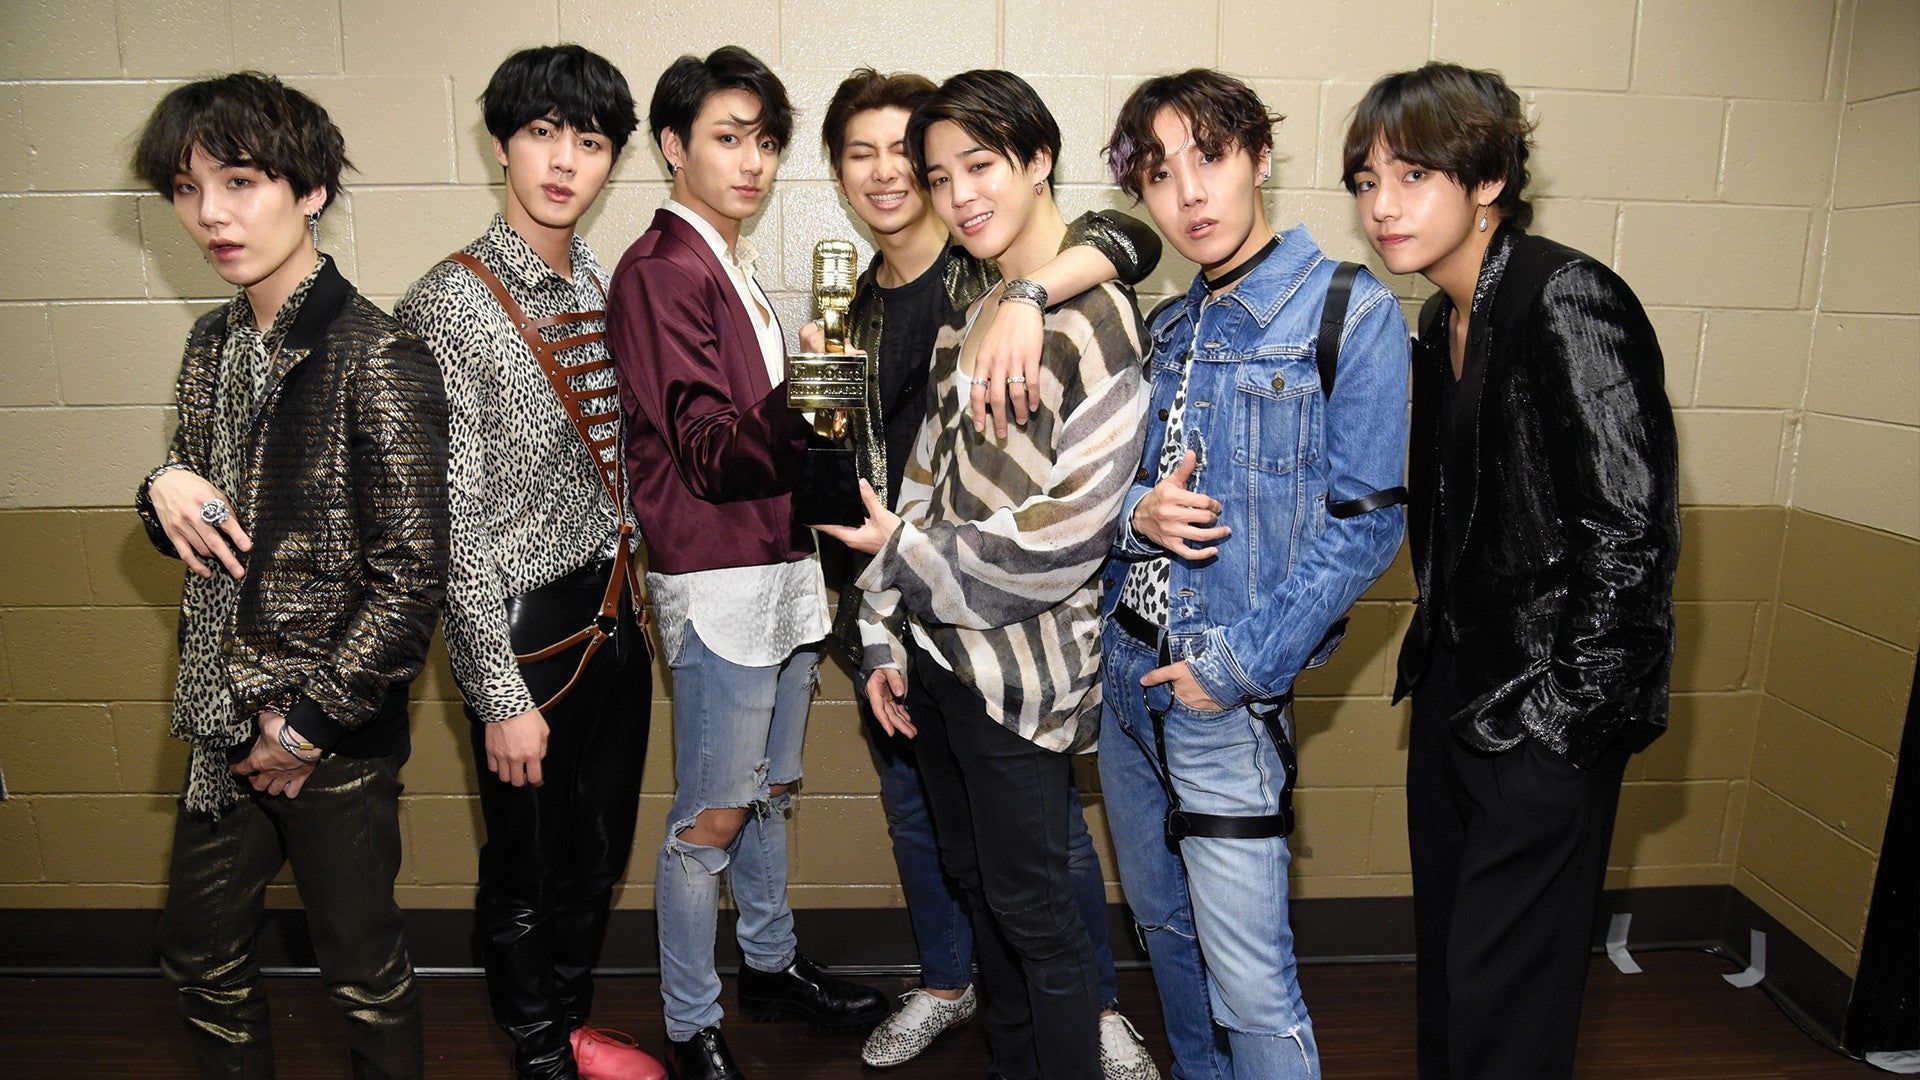 BTS' 'Love Yourself: Tear' Becomes Boy Band's First No. 1 Album in the U.S